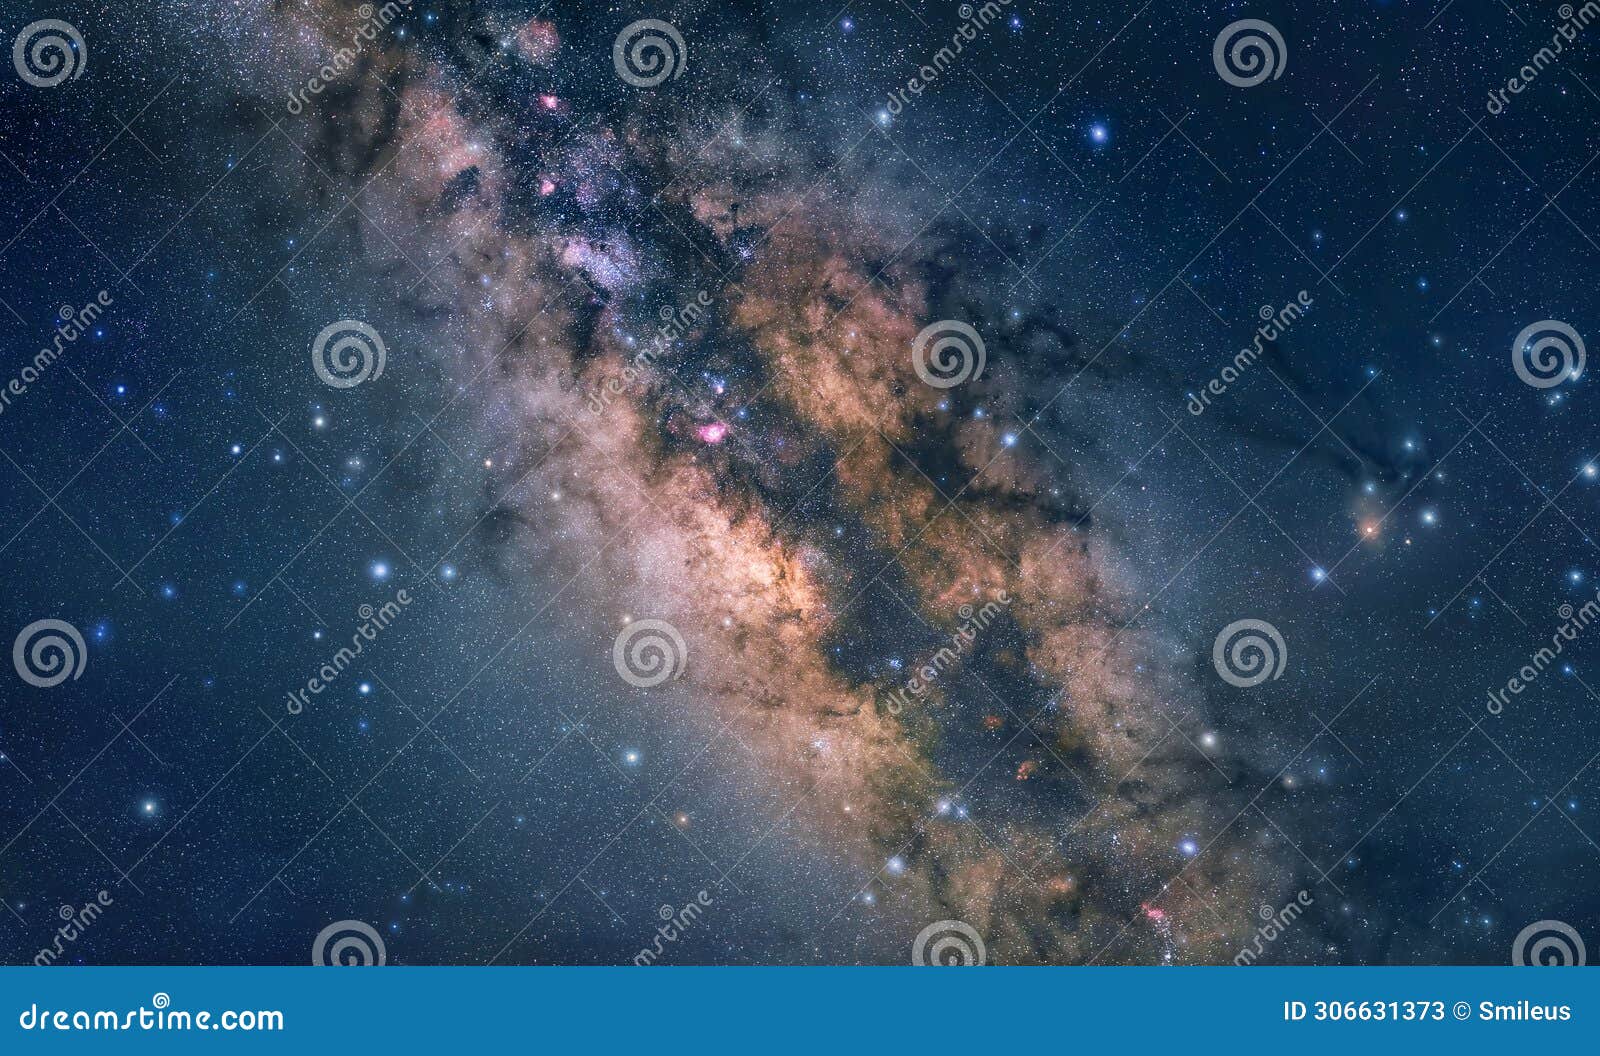 astrophotography: the milky way core